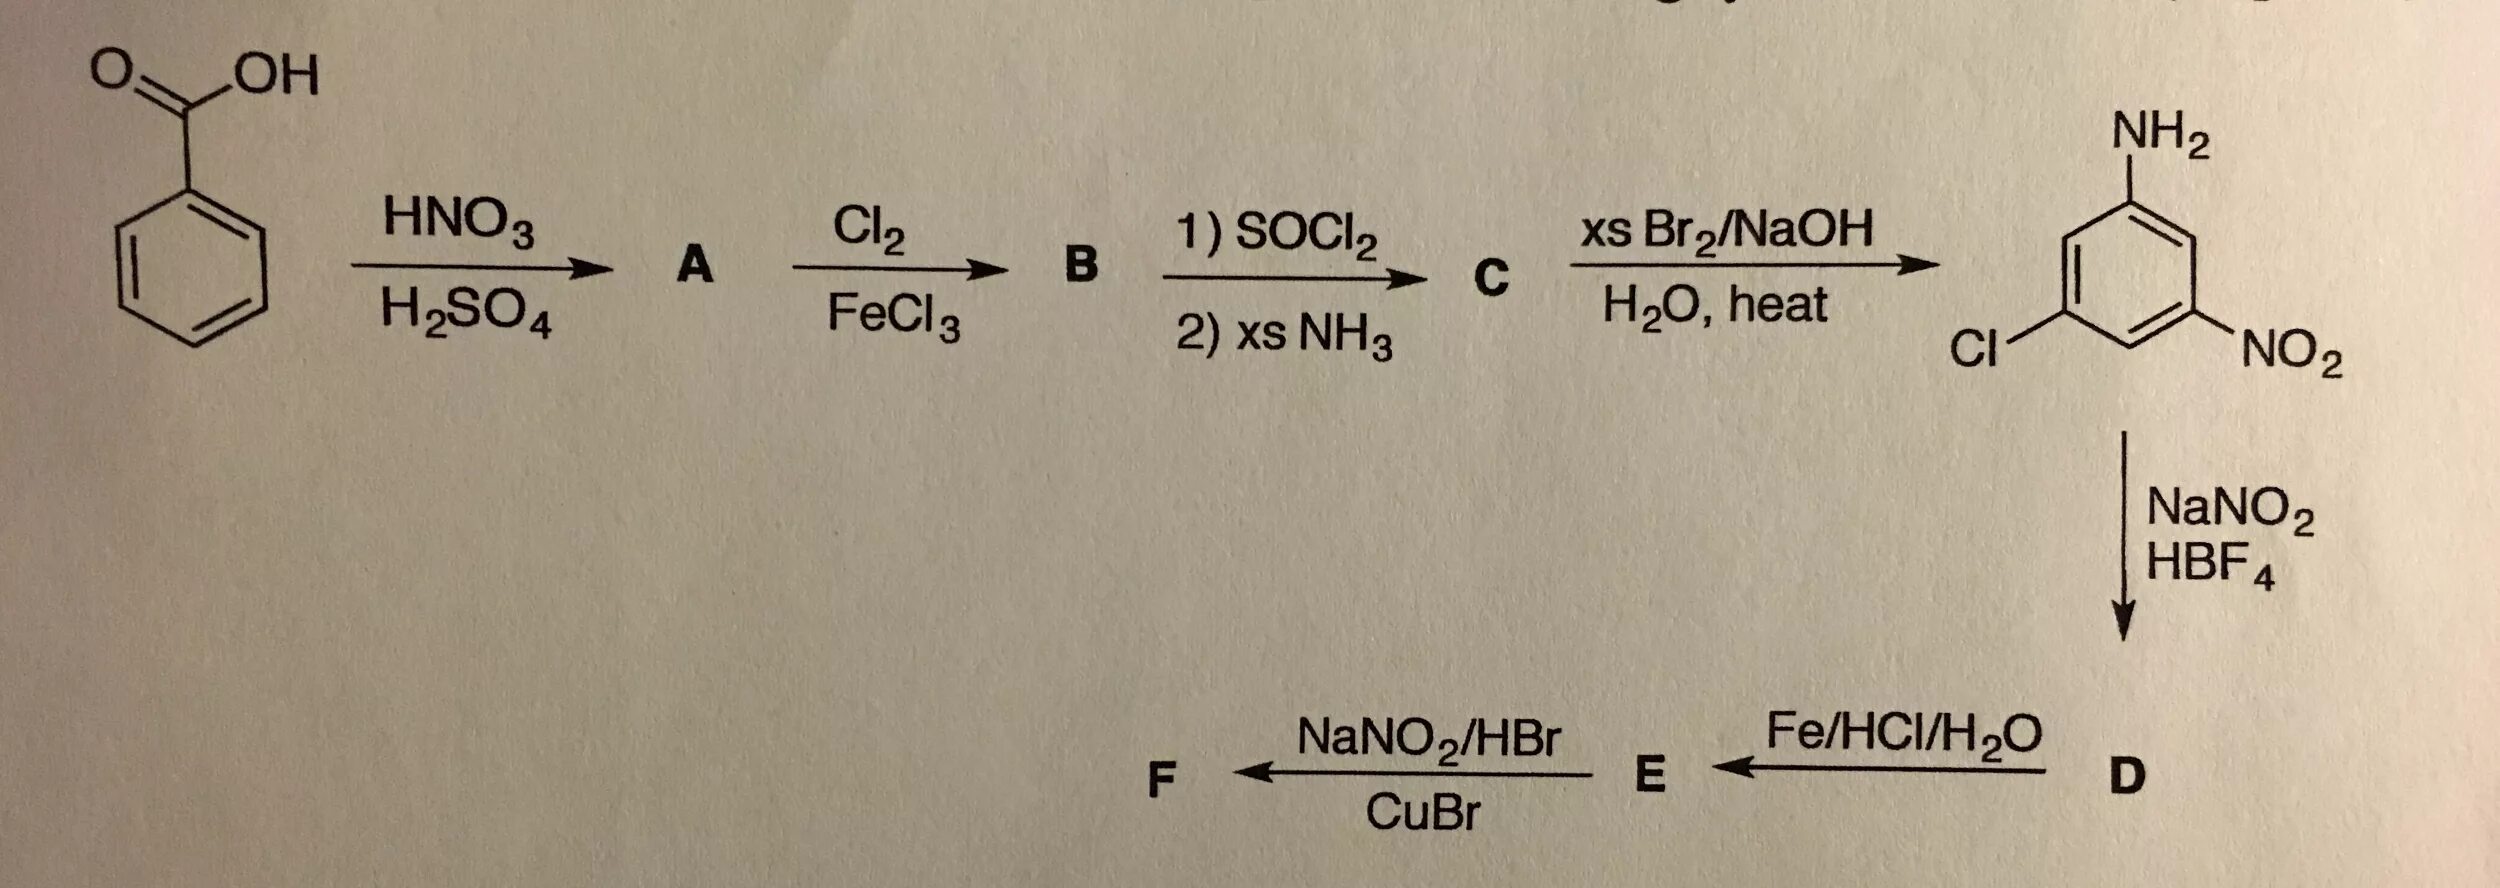 Br naoh реакция. Ch3nh3br + hno2. Бензол hno2. Метилбензол + 2cl2 al2o3. Hno3 h2so4.